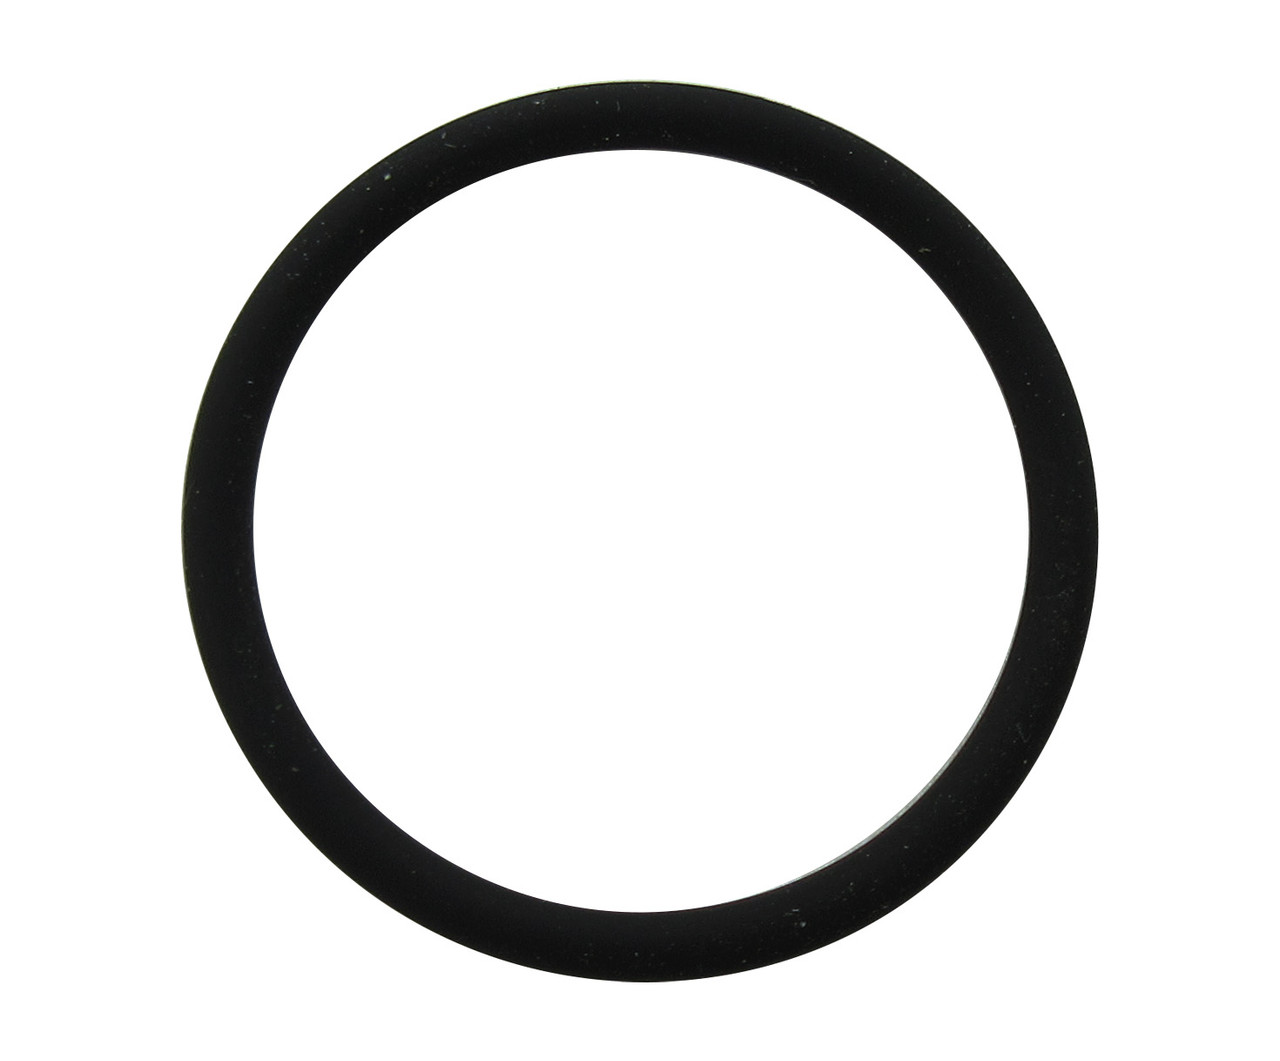 10pcs 1 1/4 Flat Gaskets Washer O Rings Water Heater Seal Silicon Avirulent  Insipidity: Amazon.com: Industrial & Scientific